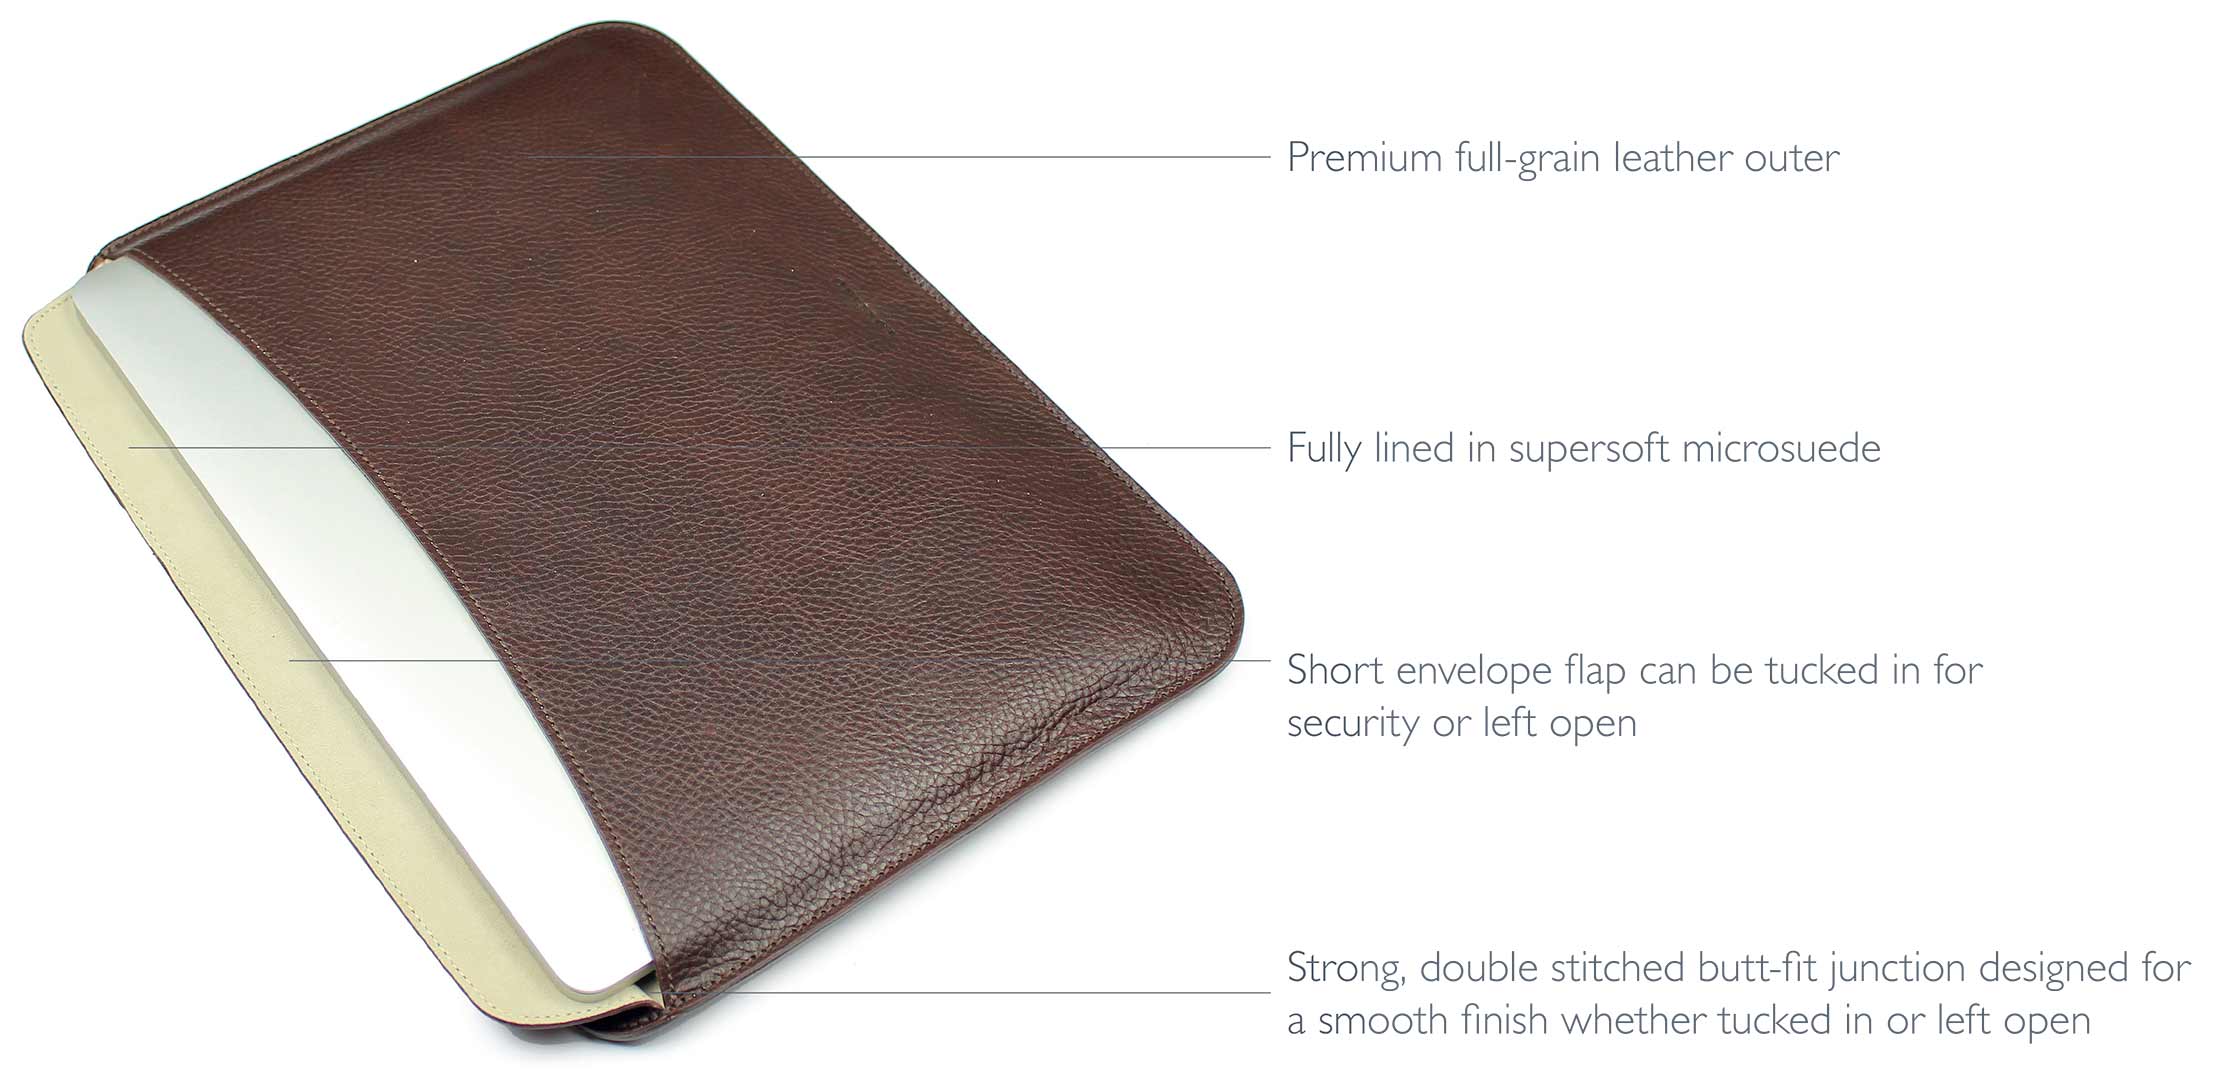 Luxury Leather Laptop Cover | Made in England by Tusting